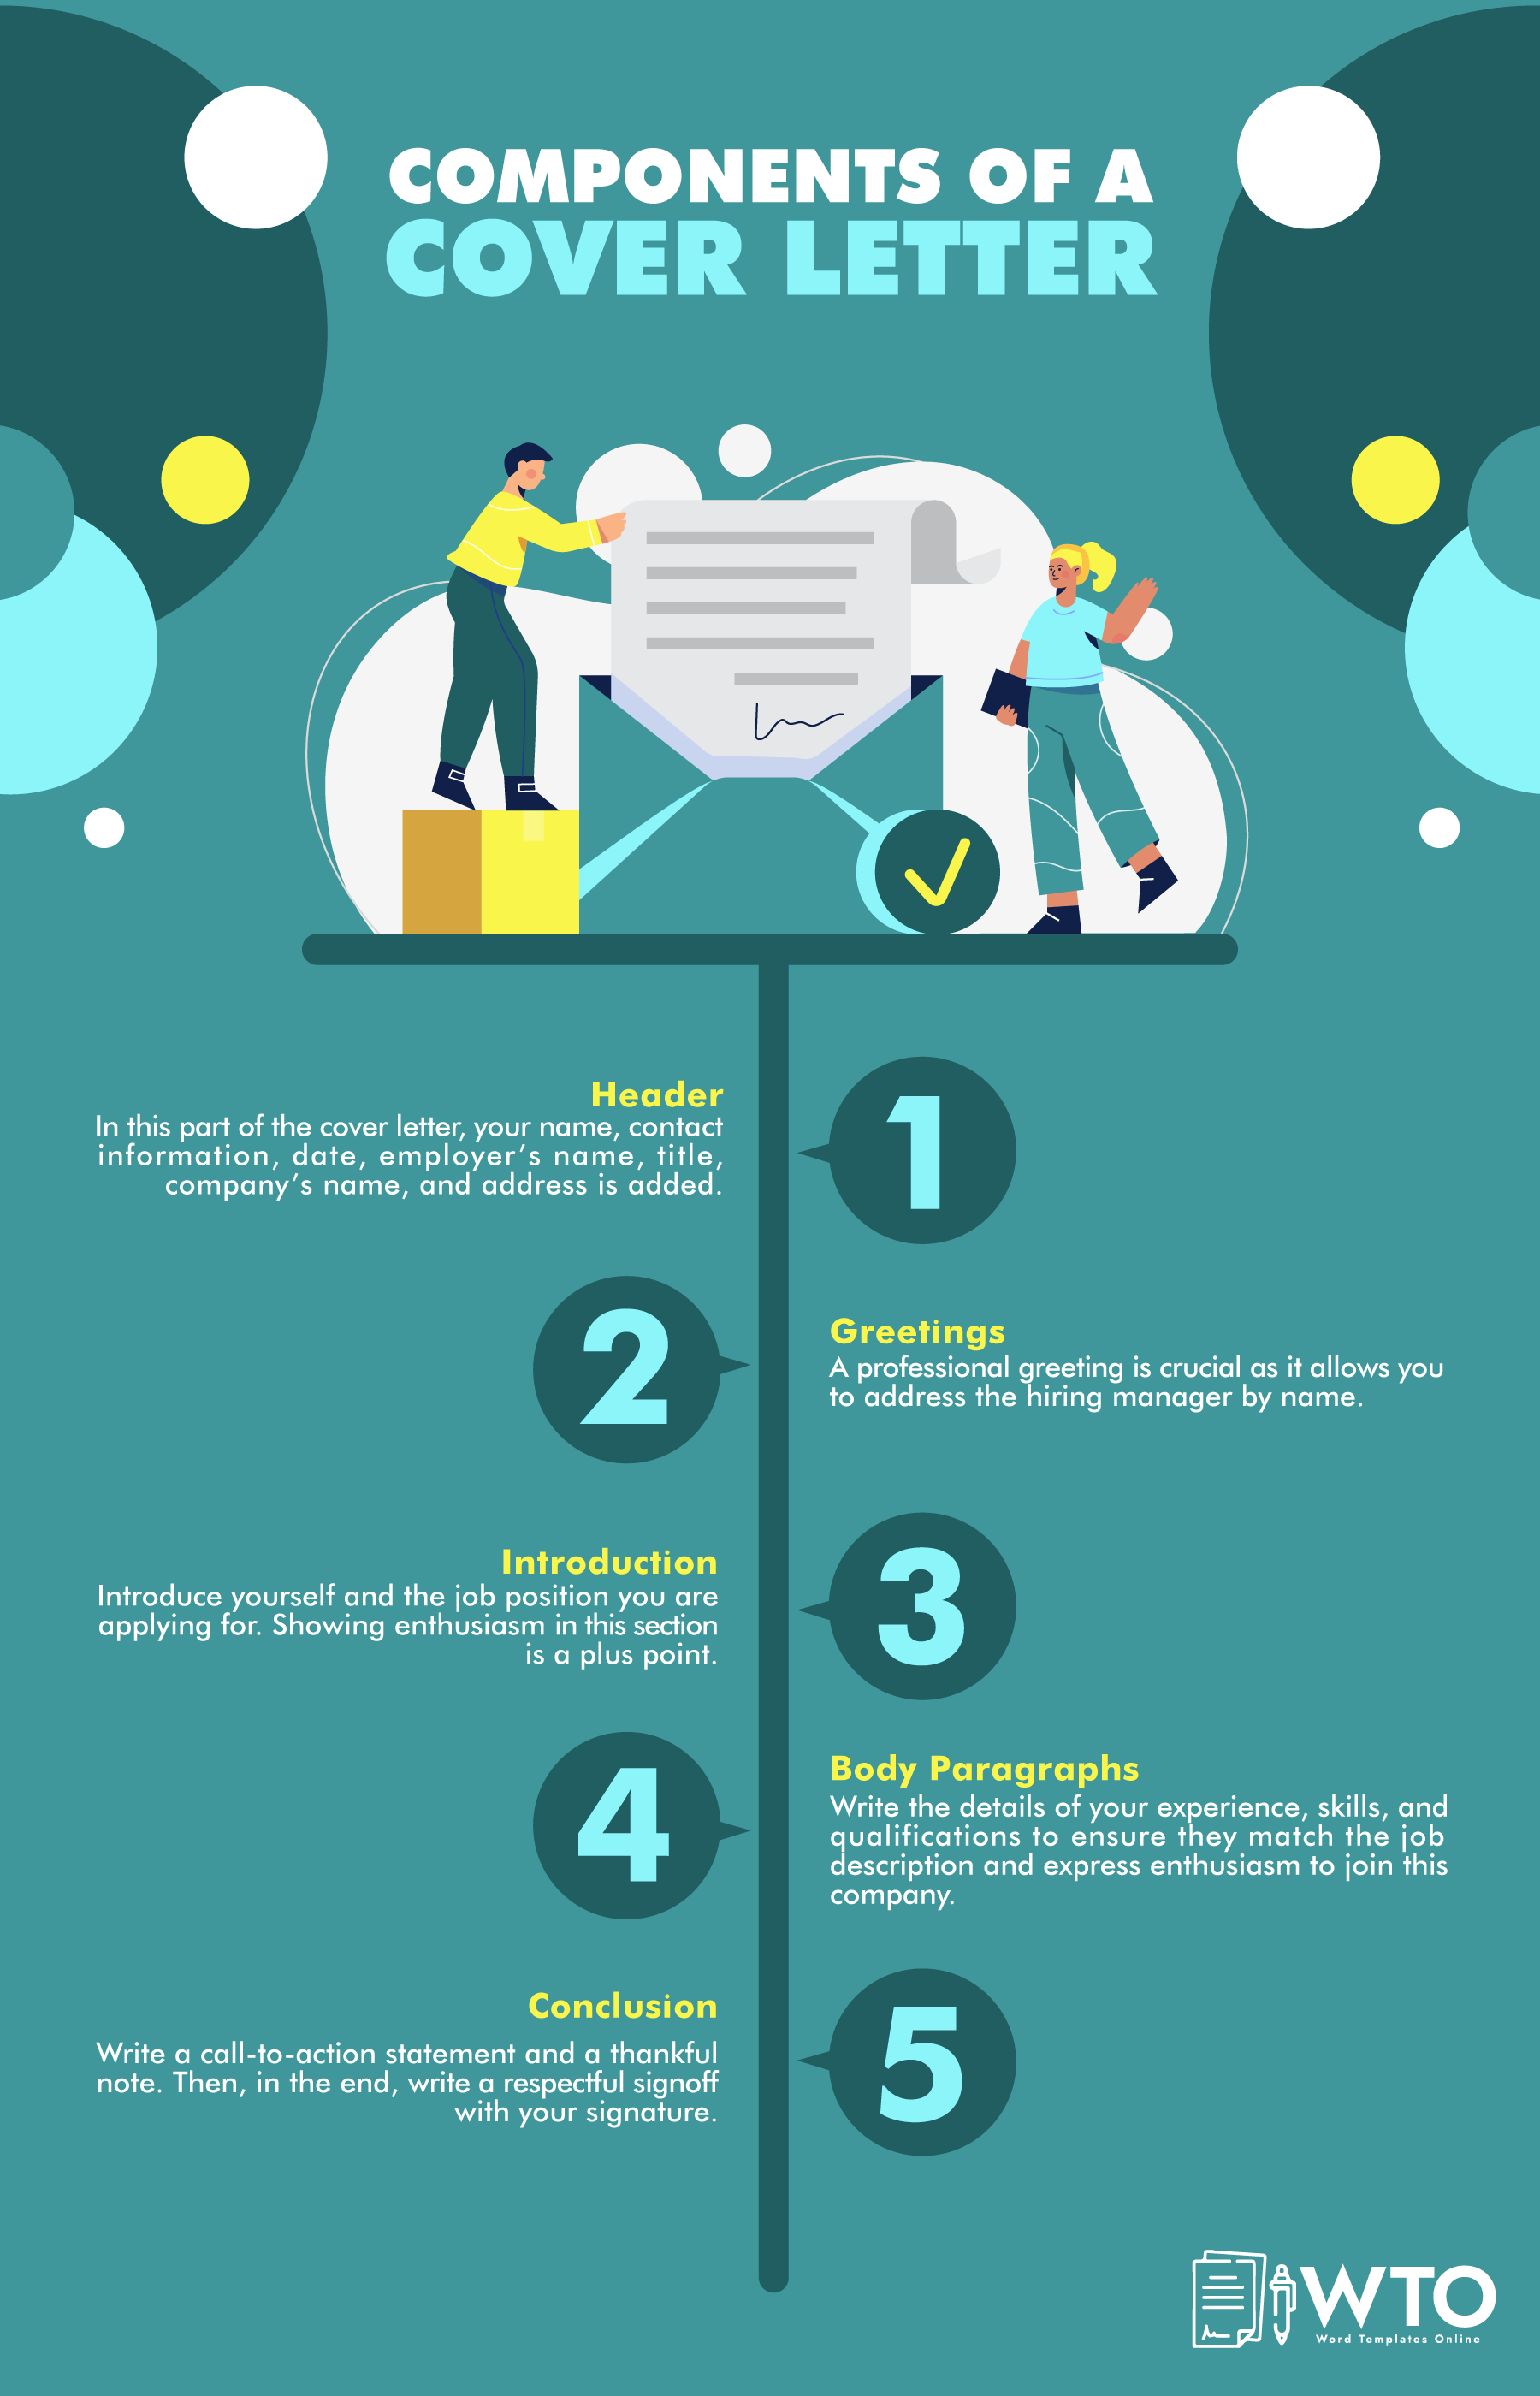 This infographic is about components of cover letter.